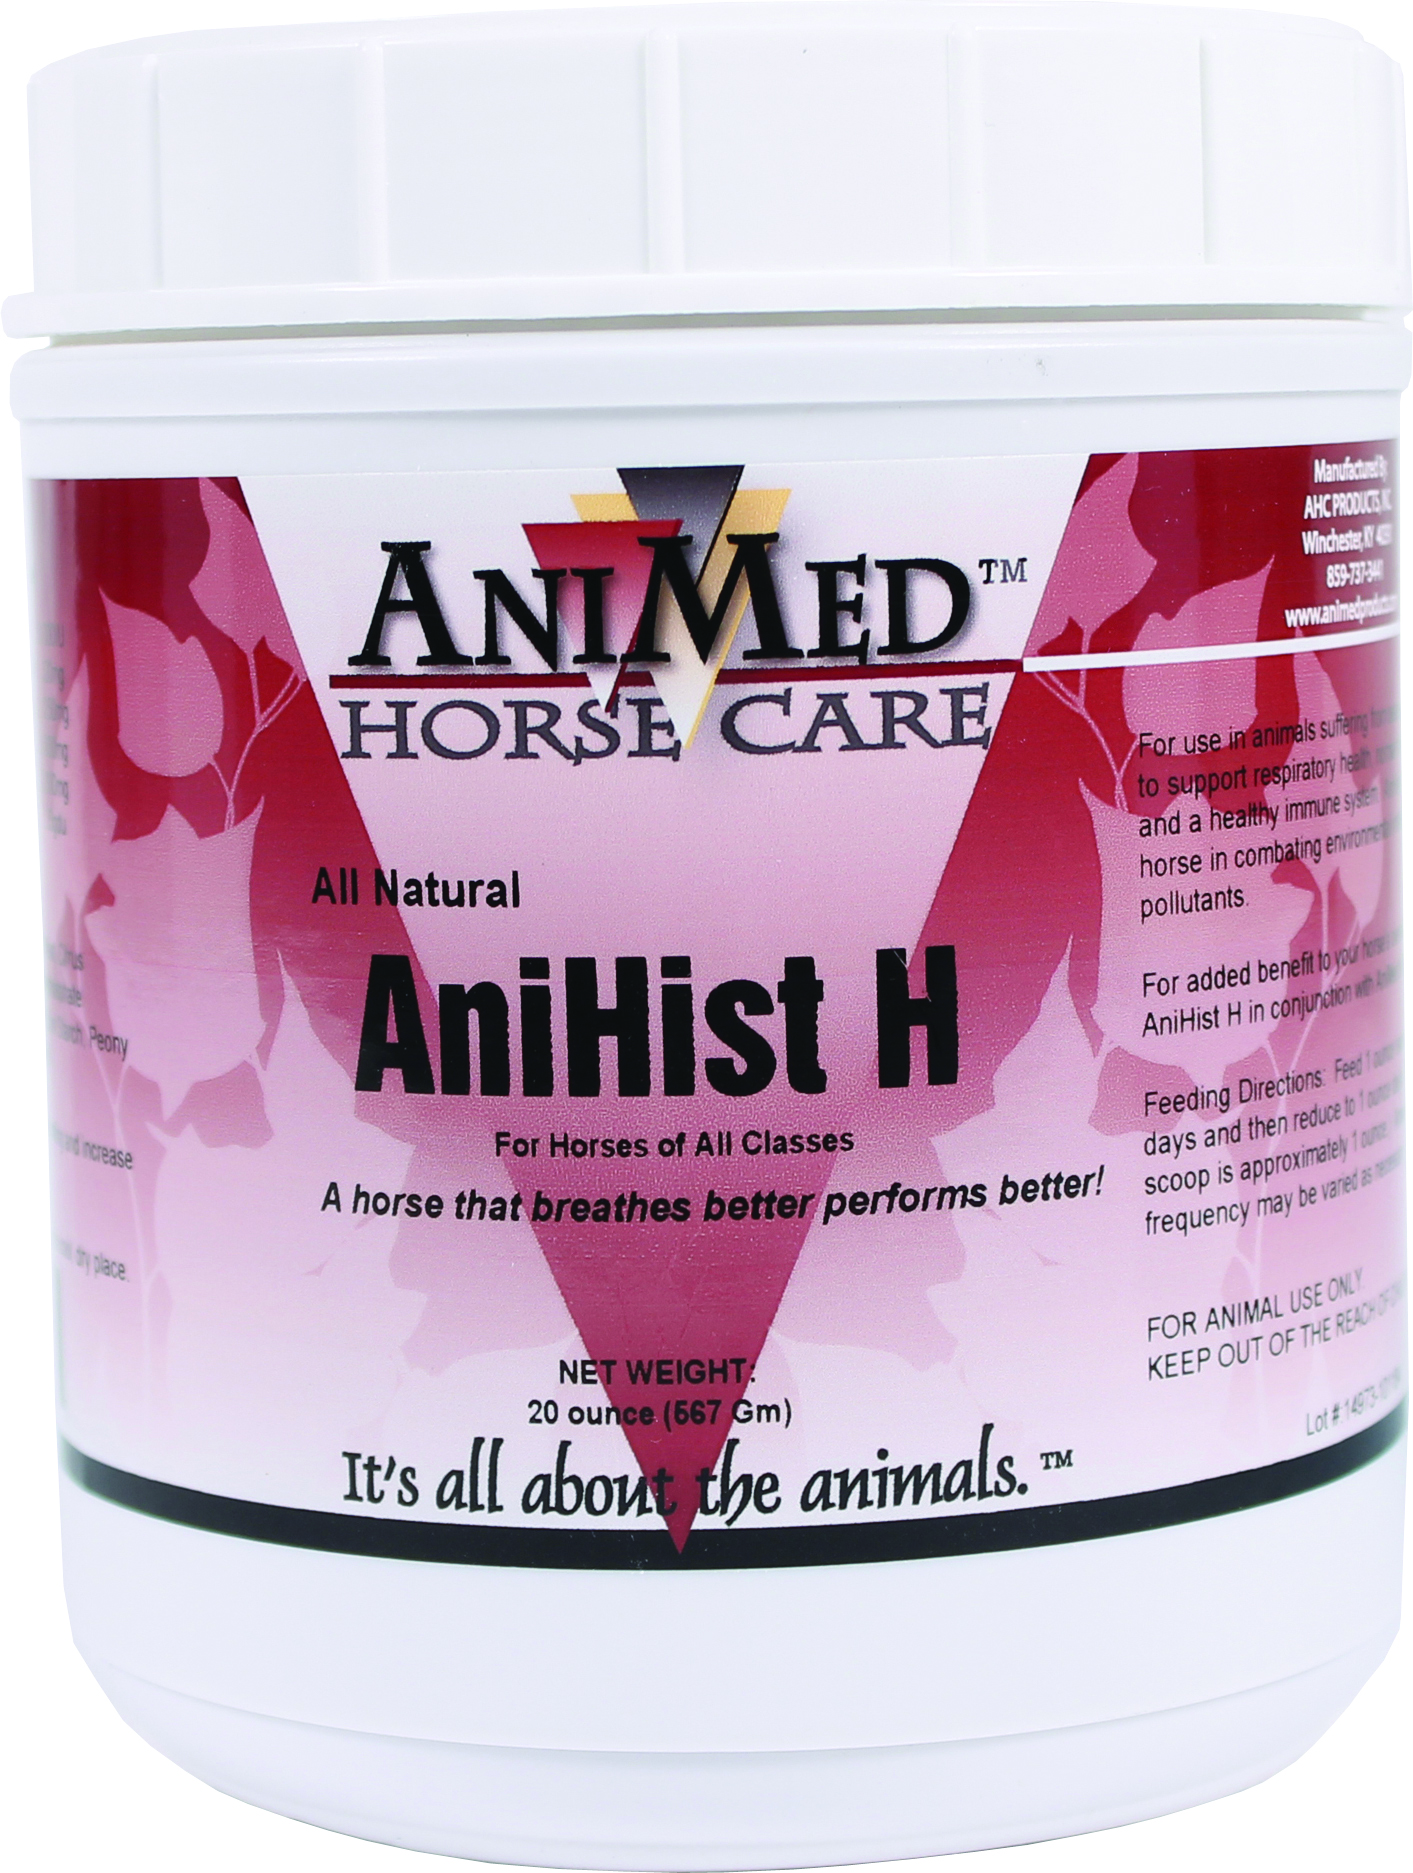 ALL NATURAL ANIHIST H ALLERGY AID FOR HORSES